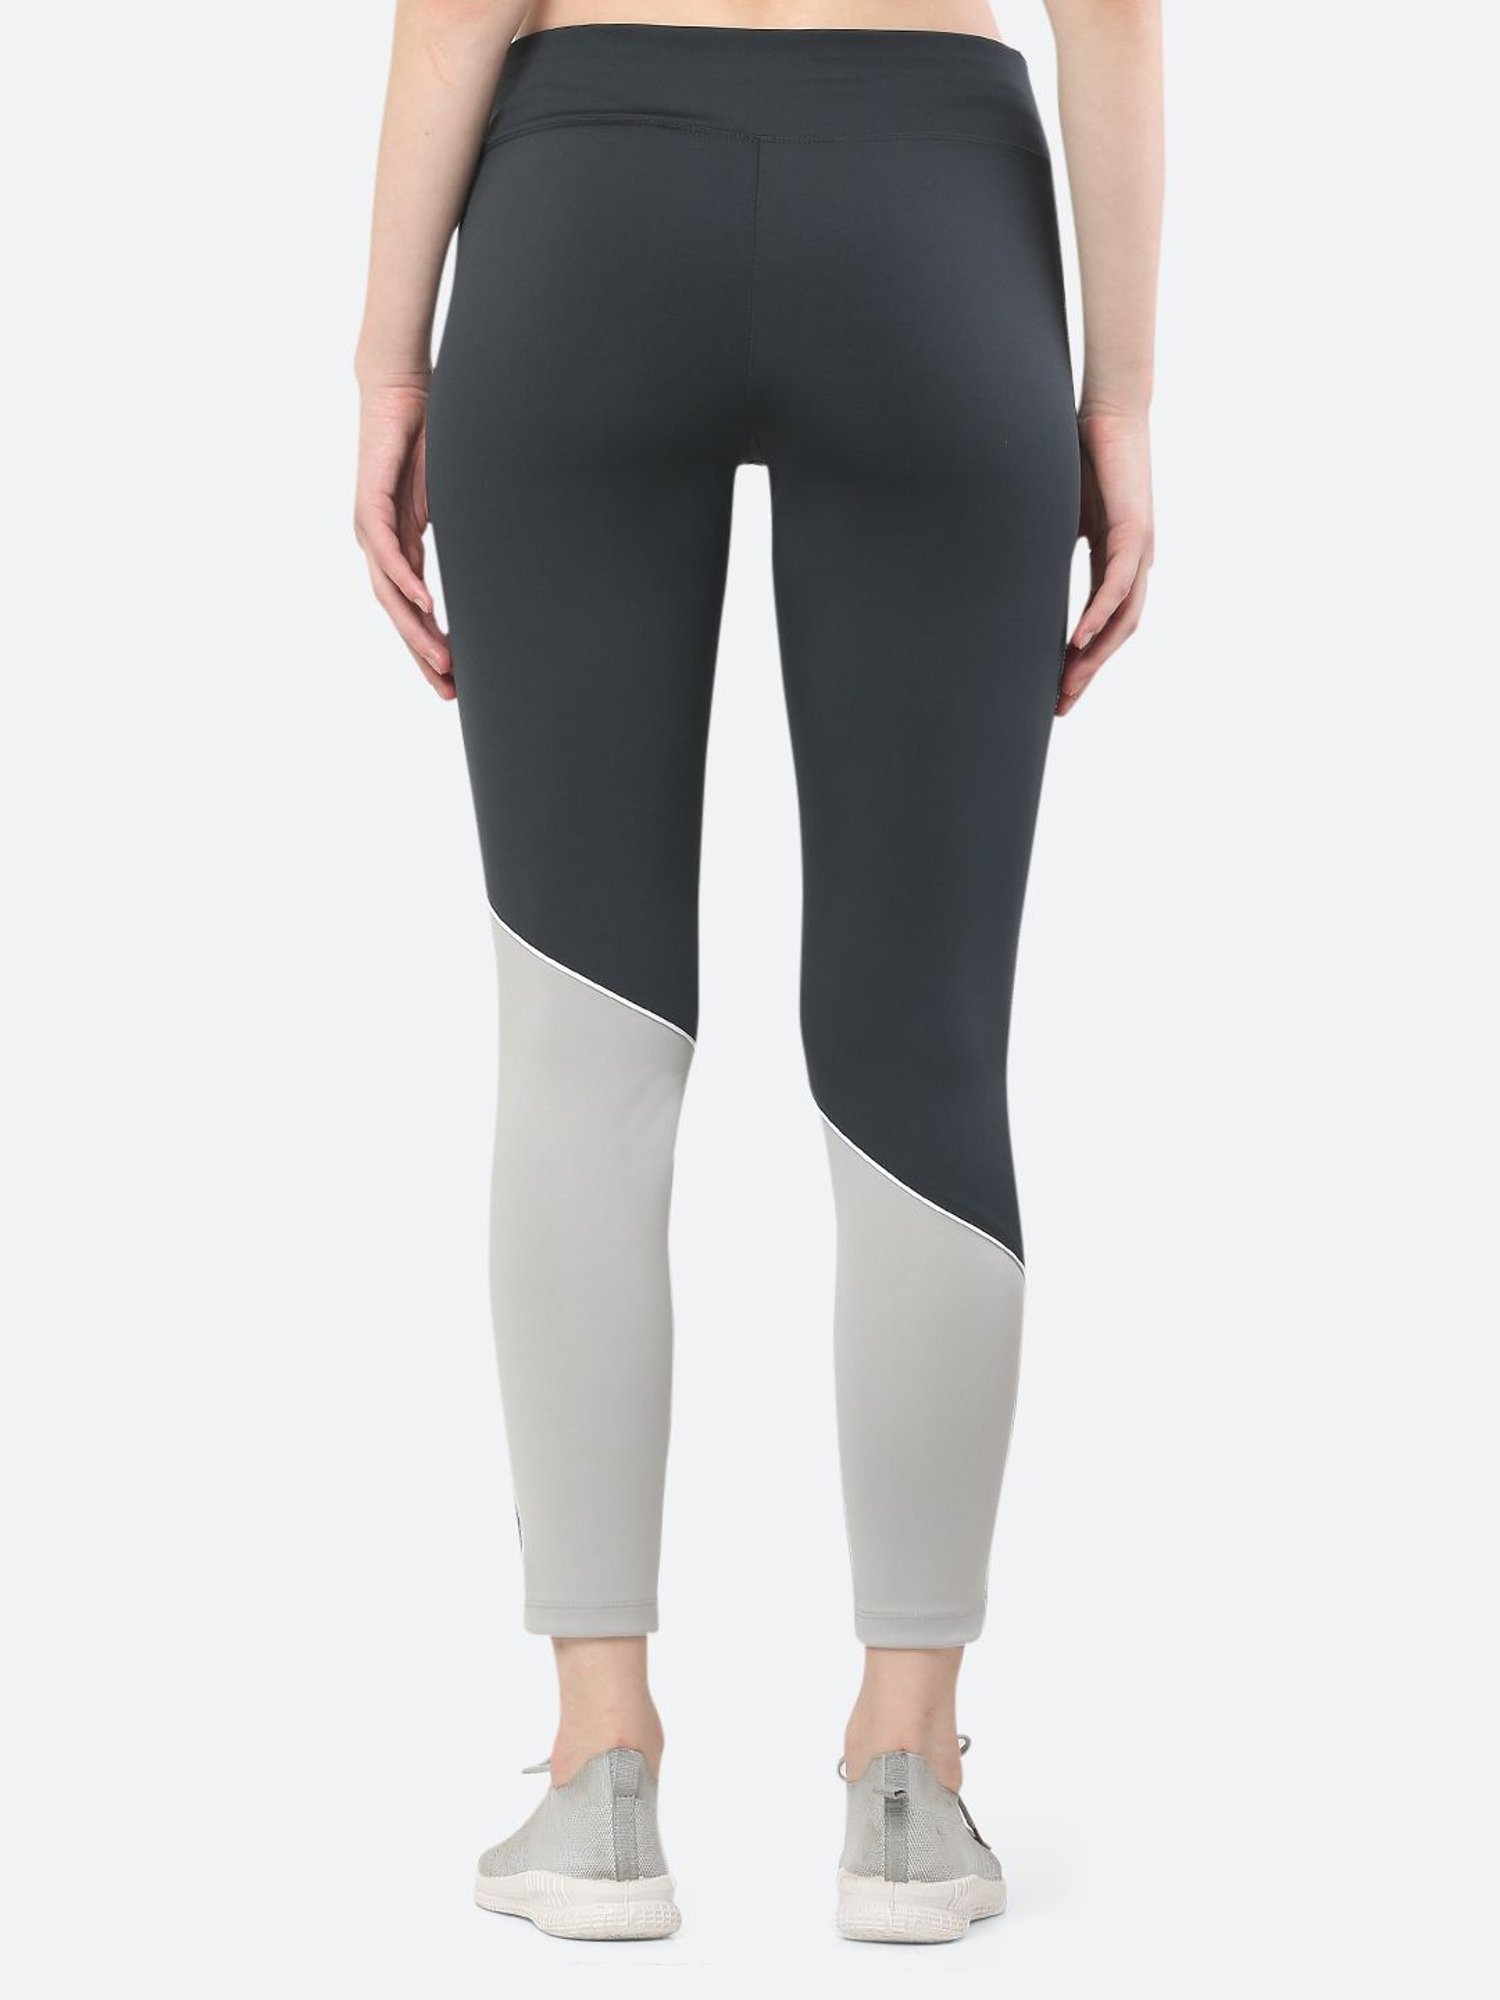 Buy Fitleasure Grey Mid Rise Tights for Women Online @ Tata CLiQ